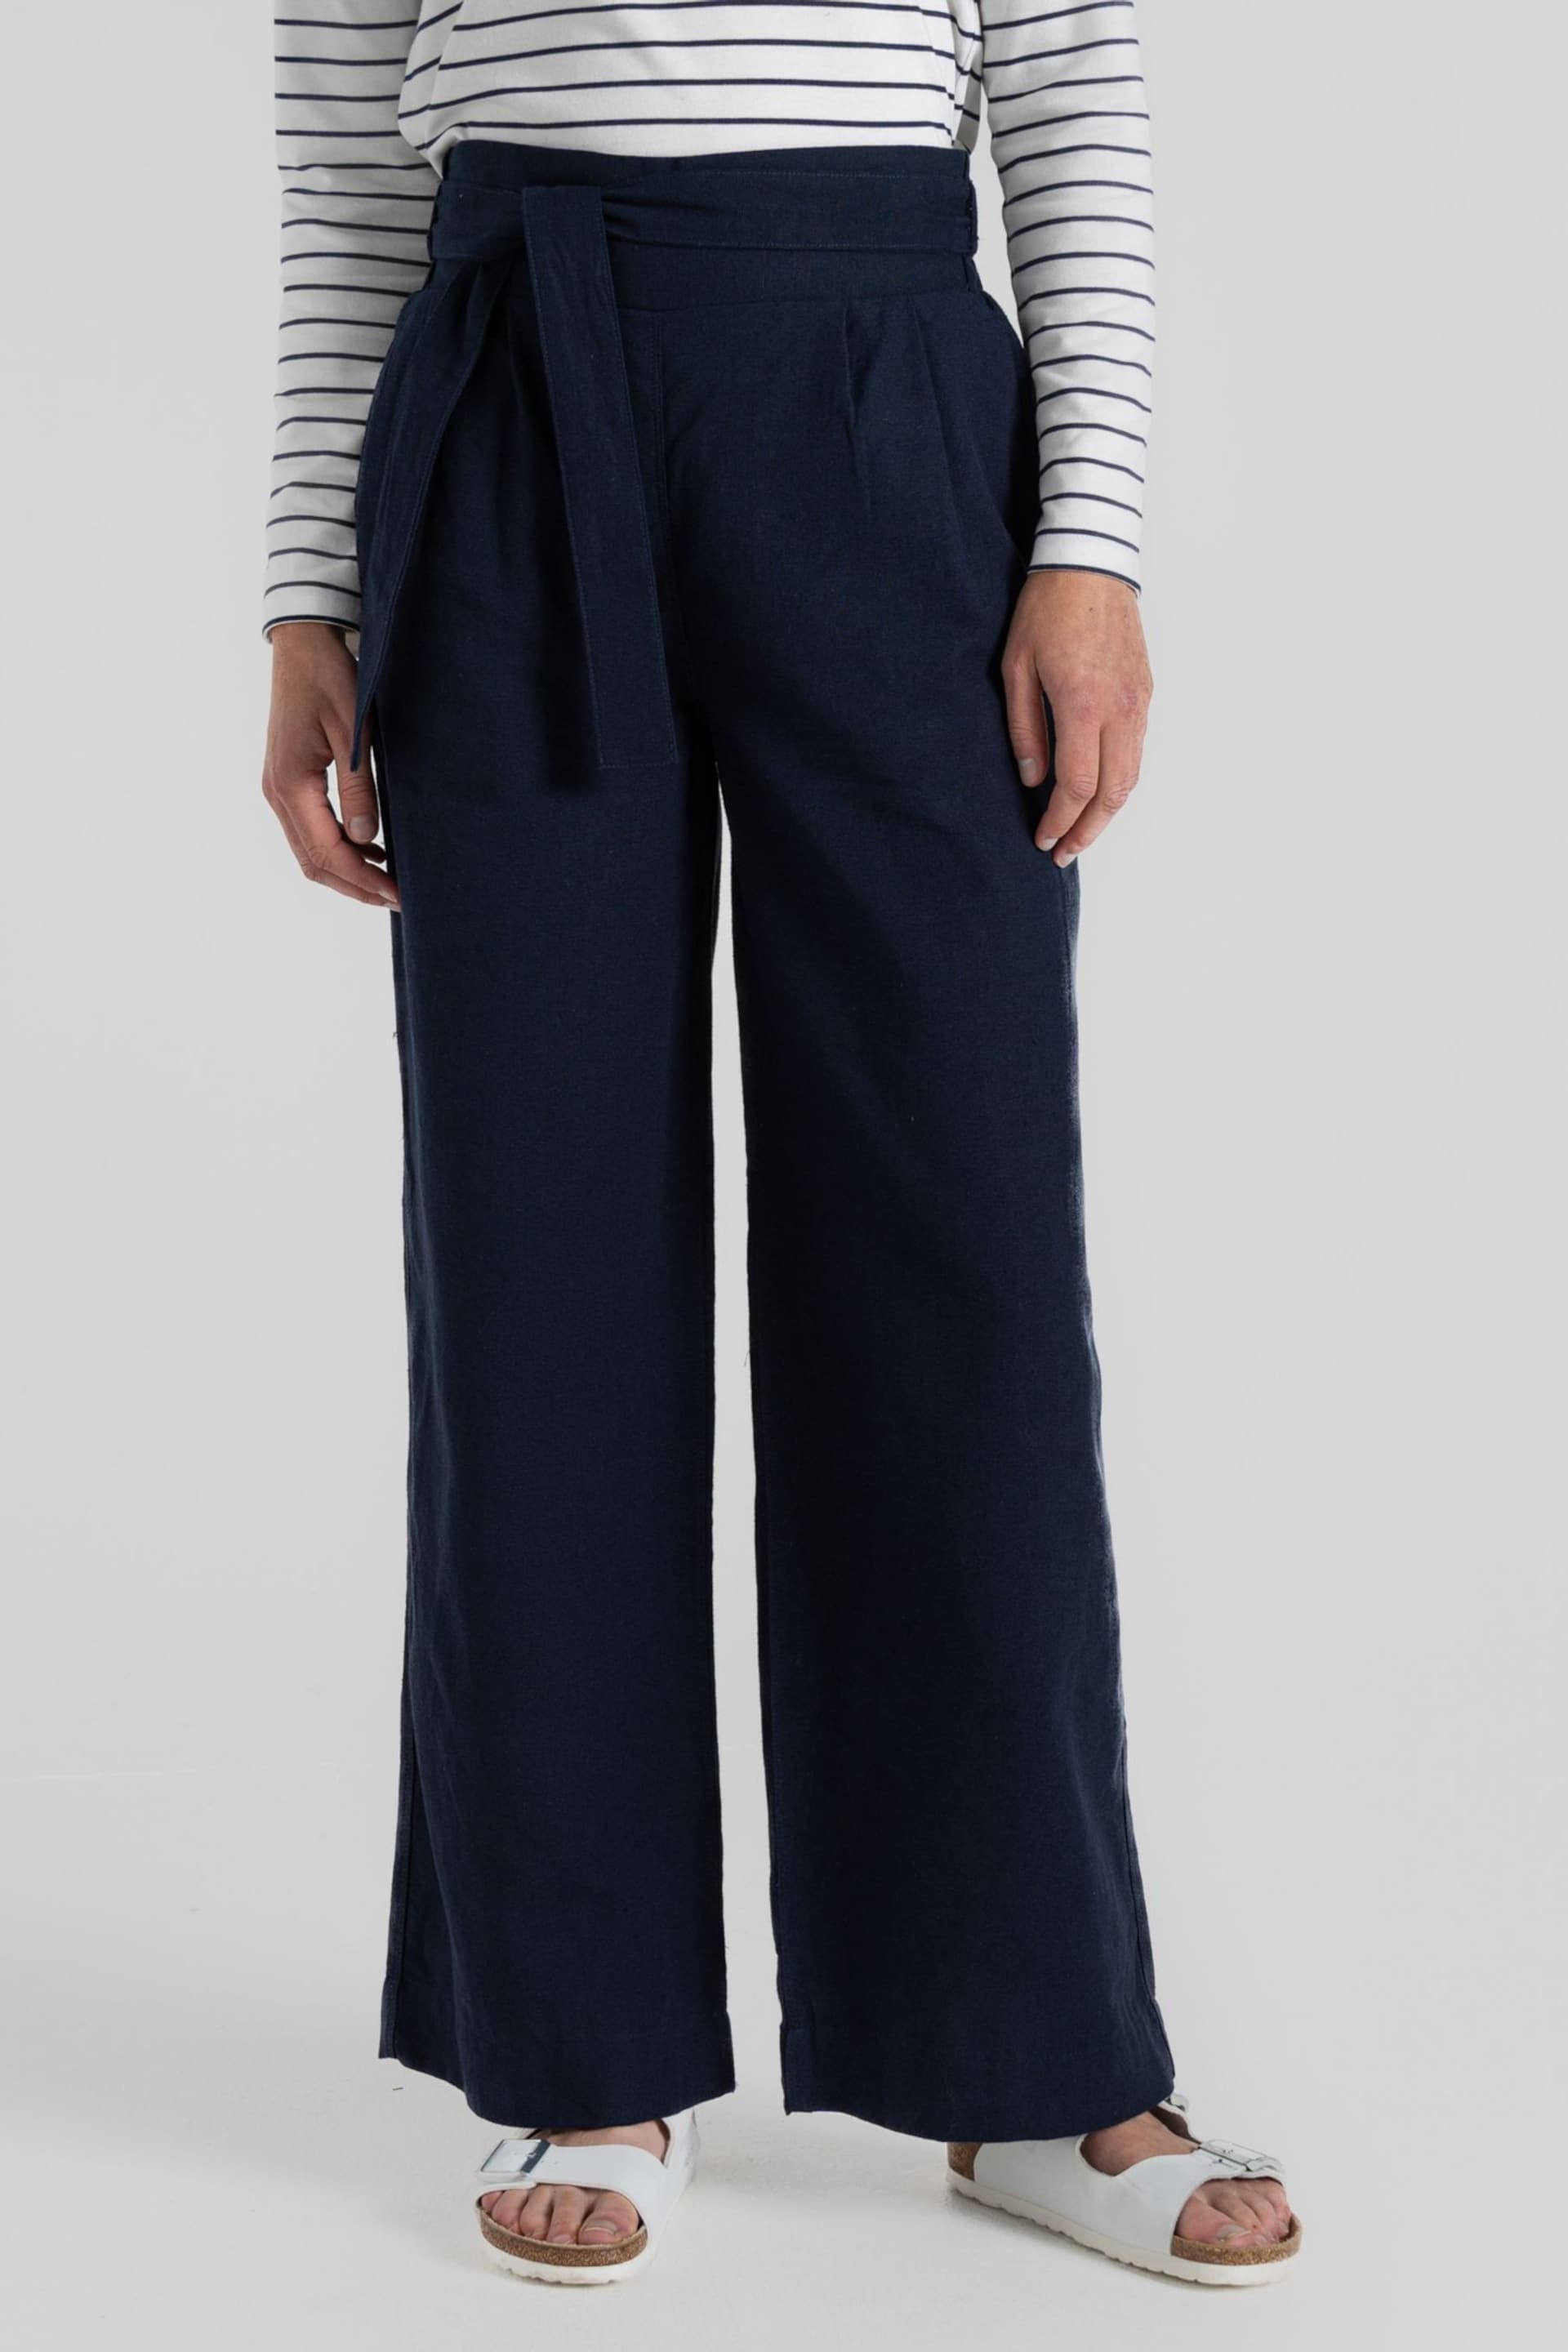 Craghoppers Blue Ophelia Trousers - Image 1 of 6